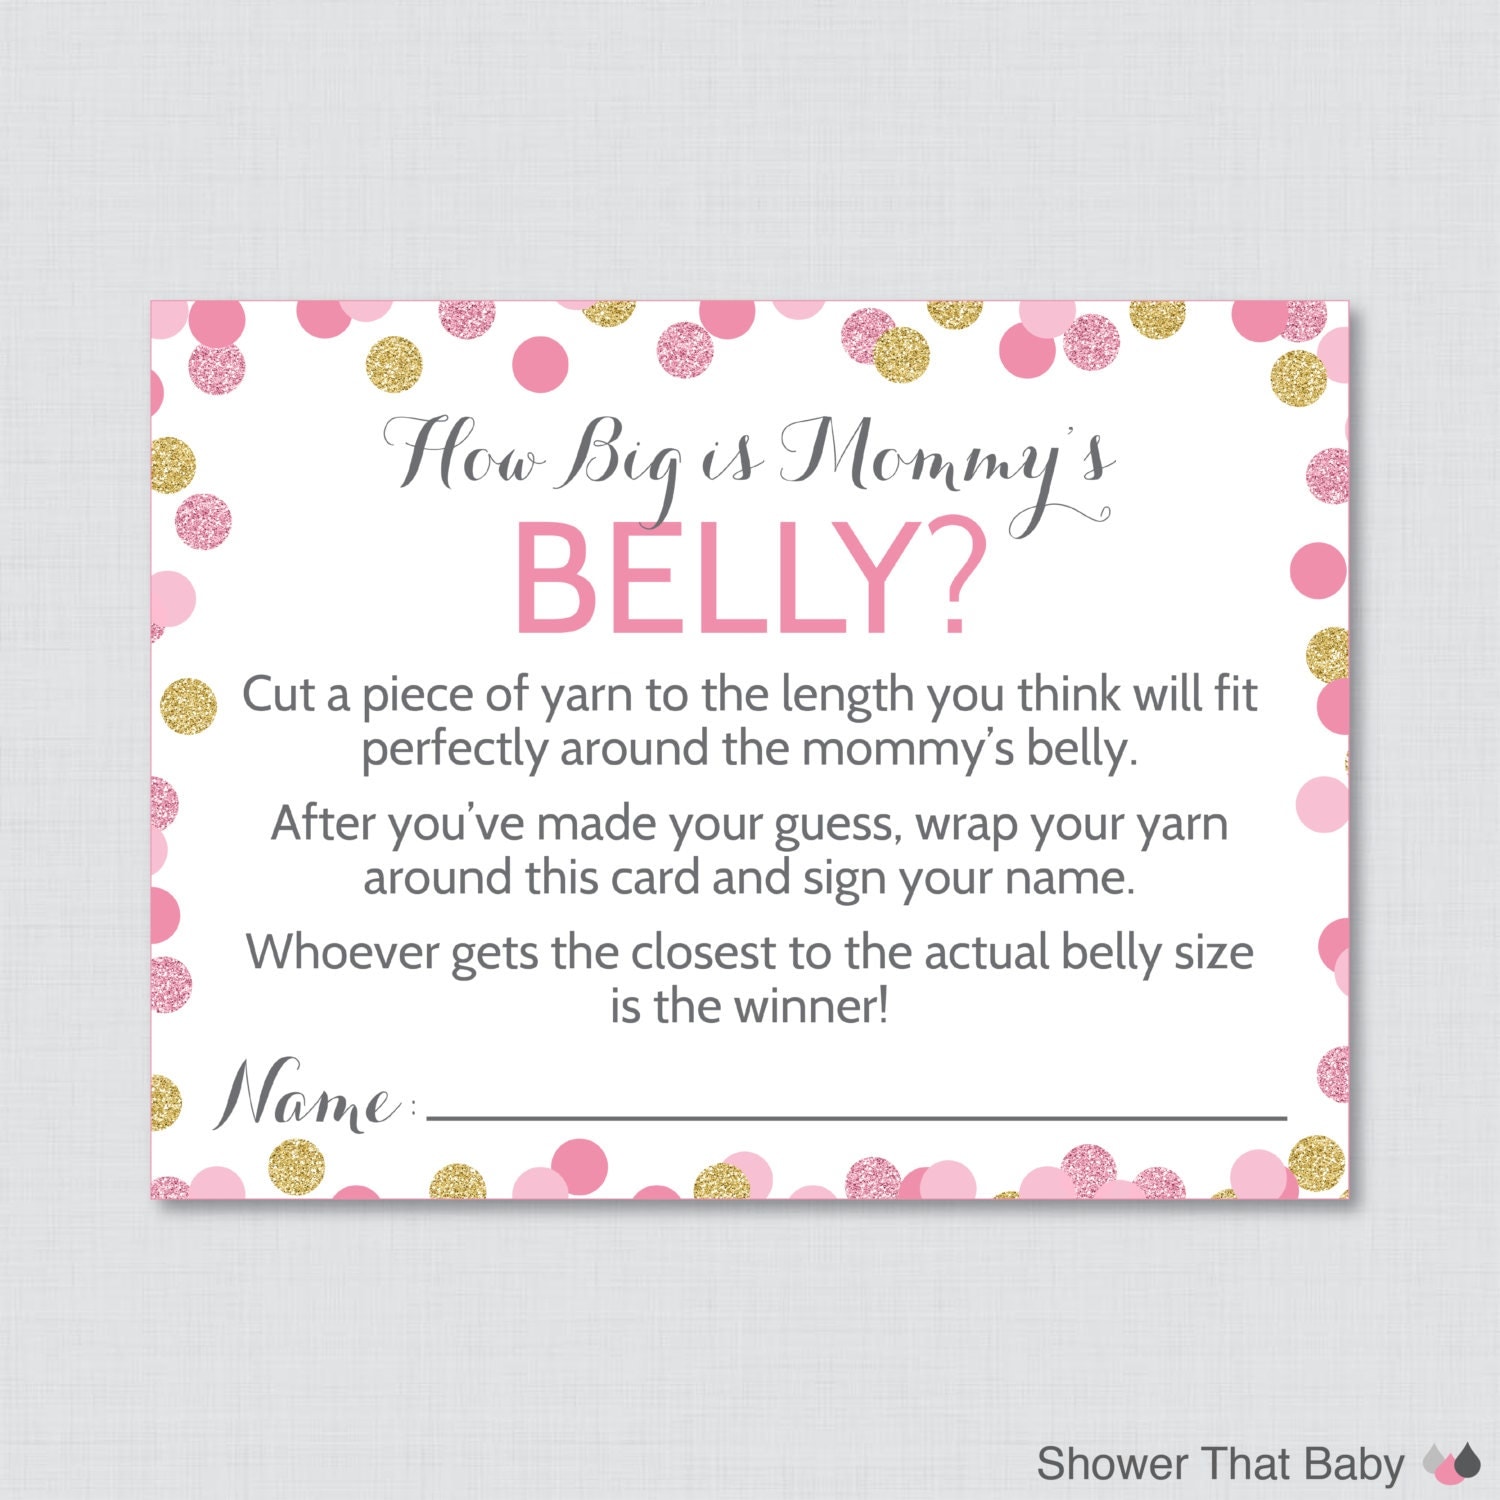 how-big-is-mommy-s-belly-game-free-printable-ideas-of-europedias